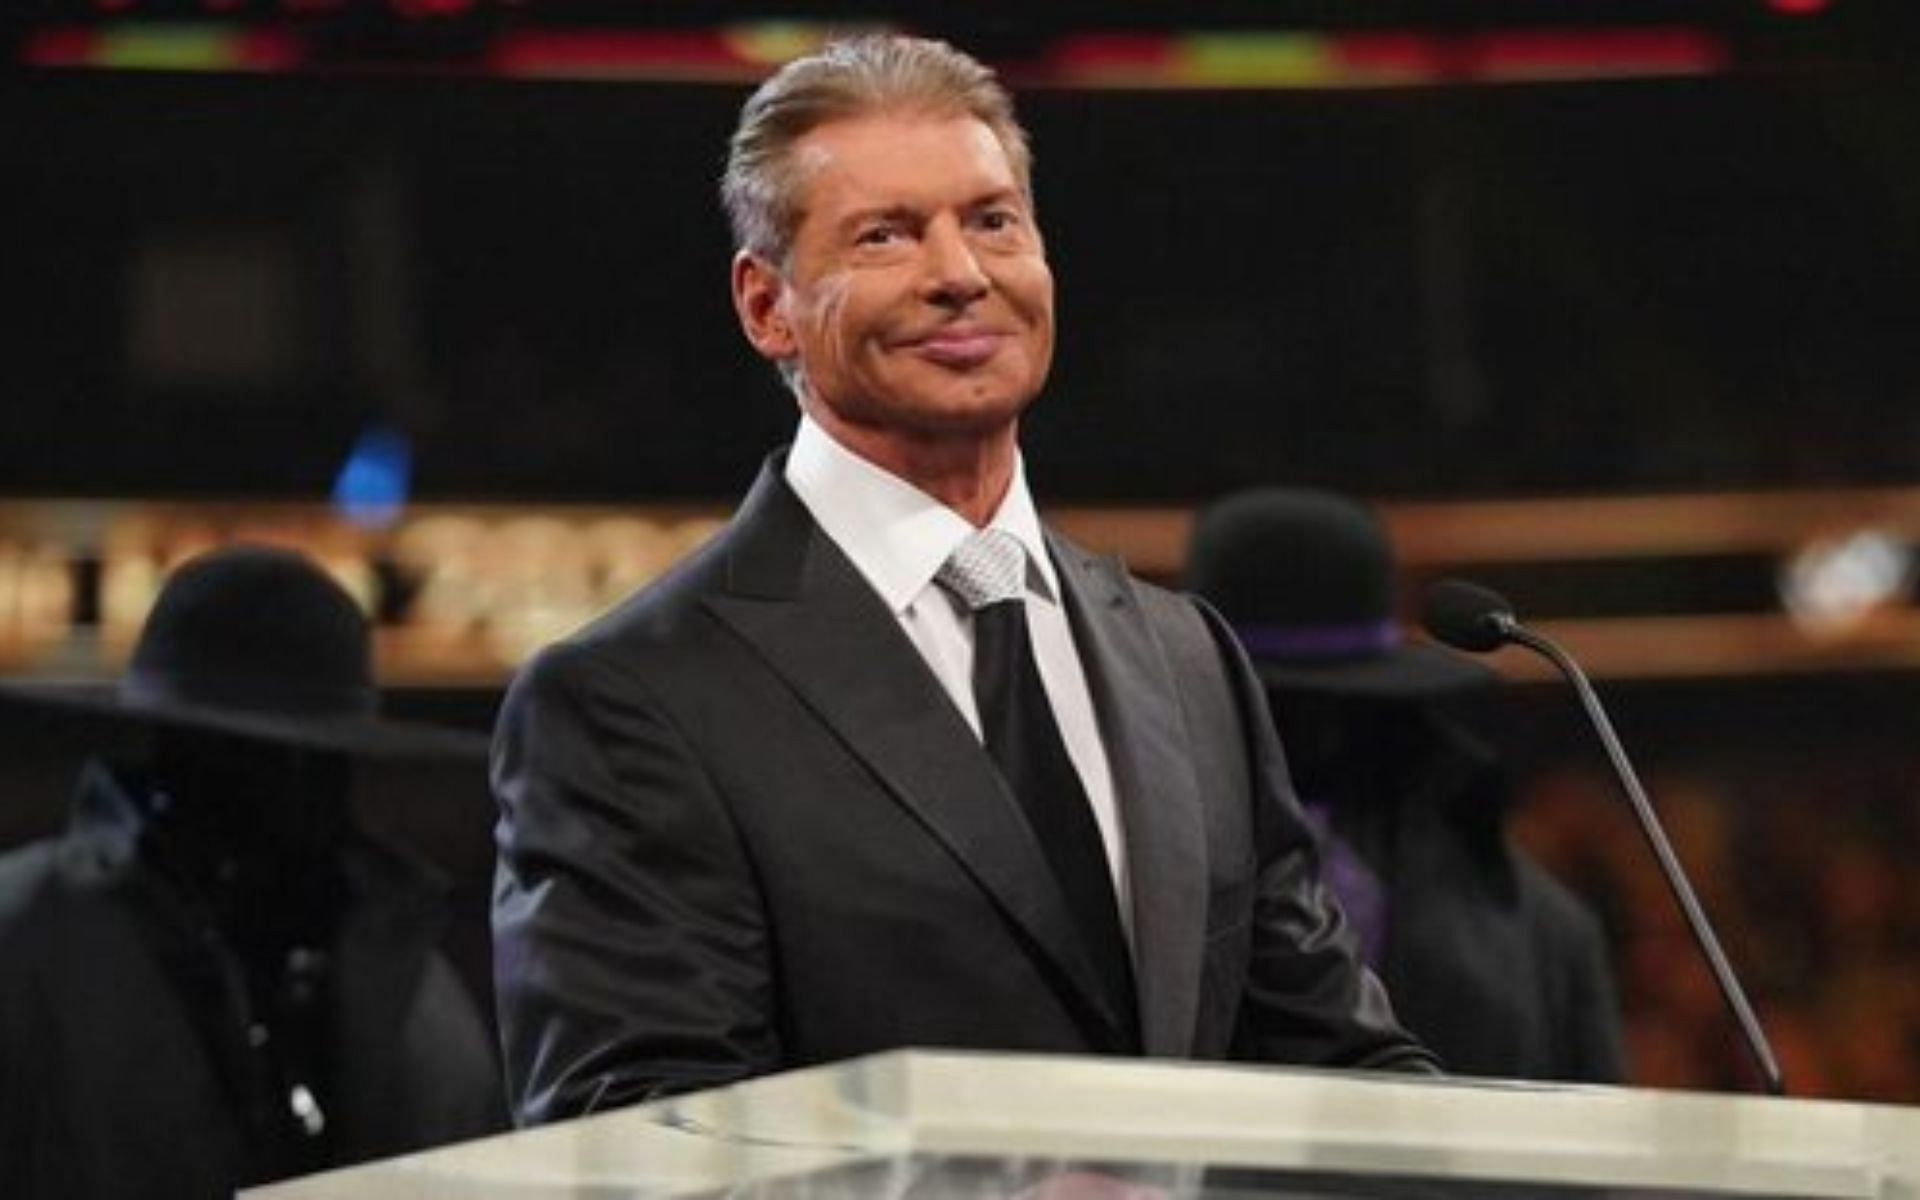 Mr. McMahon is the most influential person in pro wrestling history.